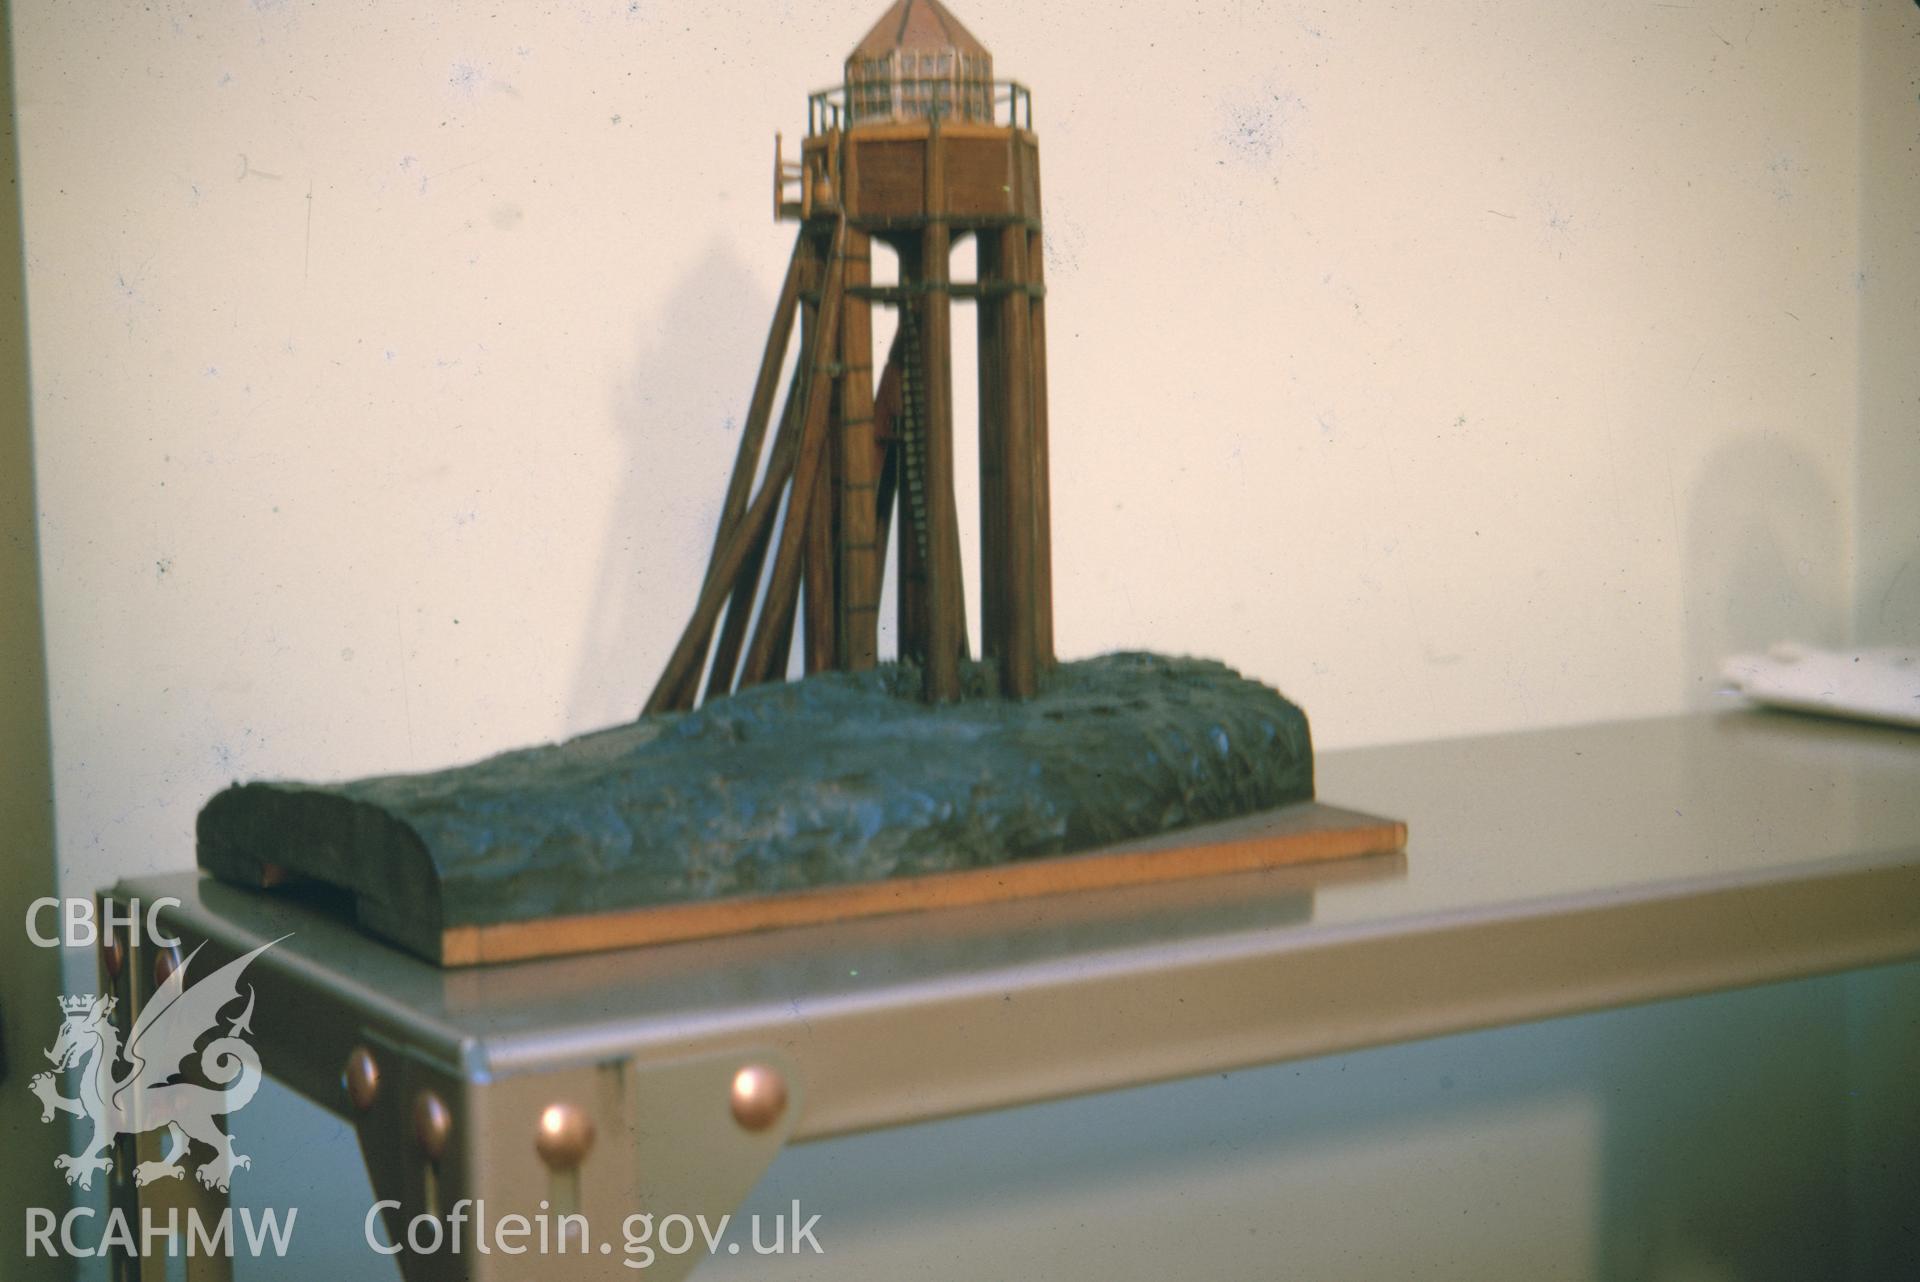 Colour slide showing model of the eighteenth-century lighthouse.